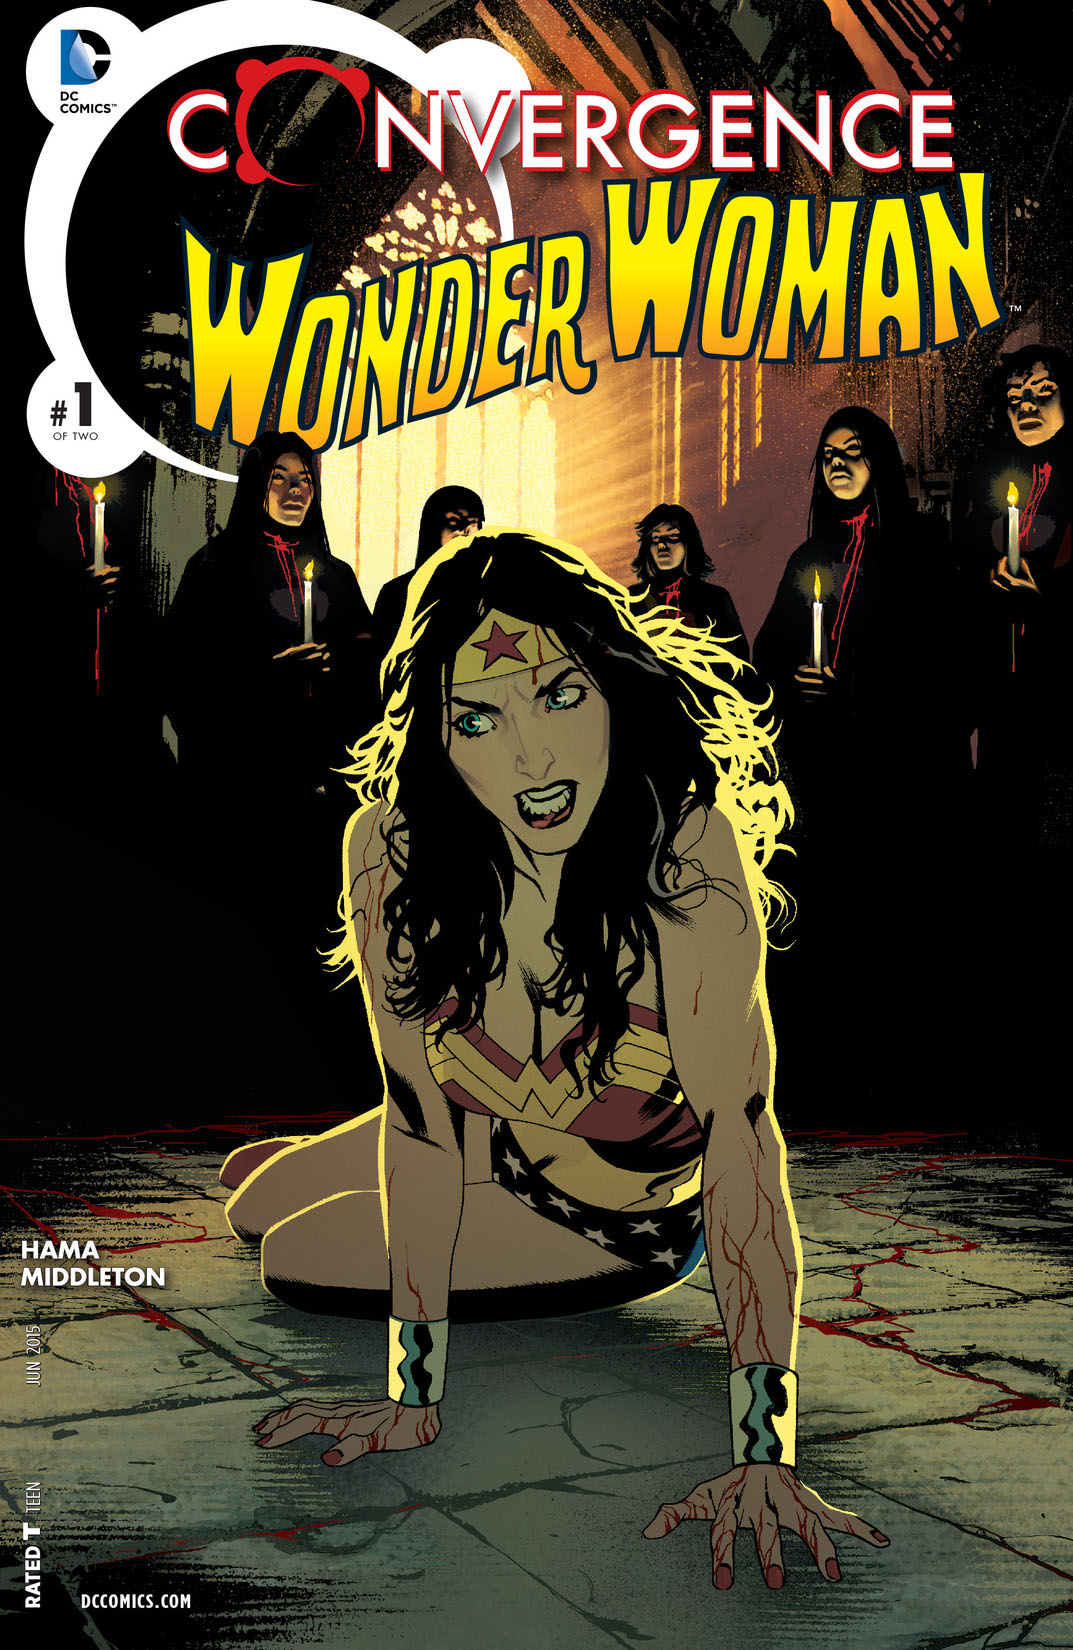 Convergence: Wonder Woman #1 preview images